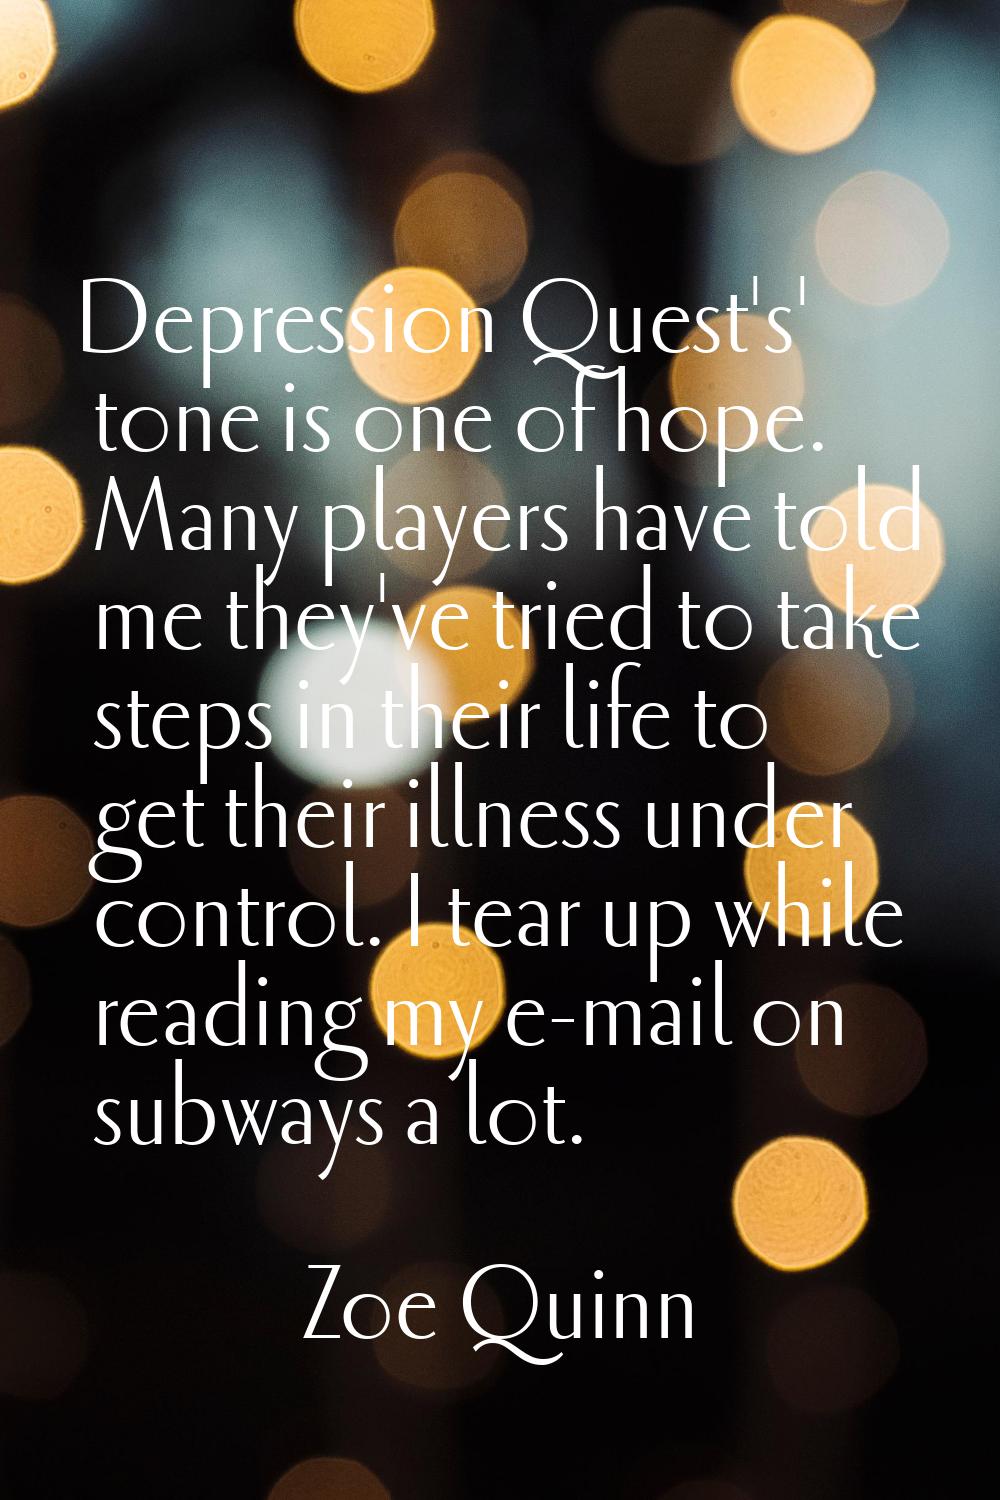 Depression Quest's' tone is one of hope. Many players have told me they've tried to take steps in t